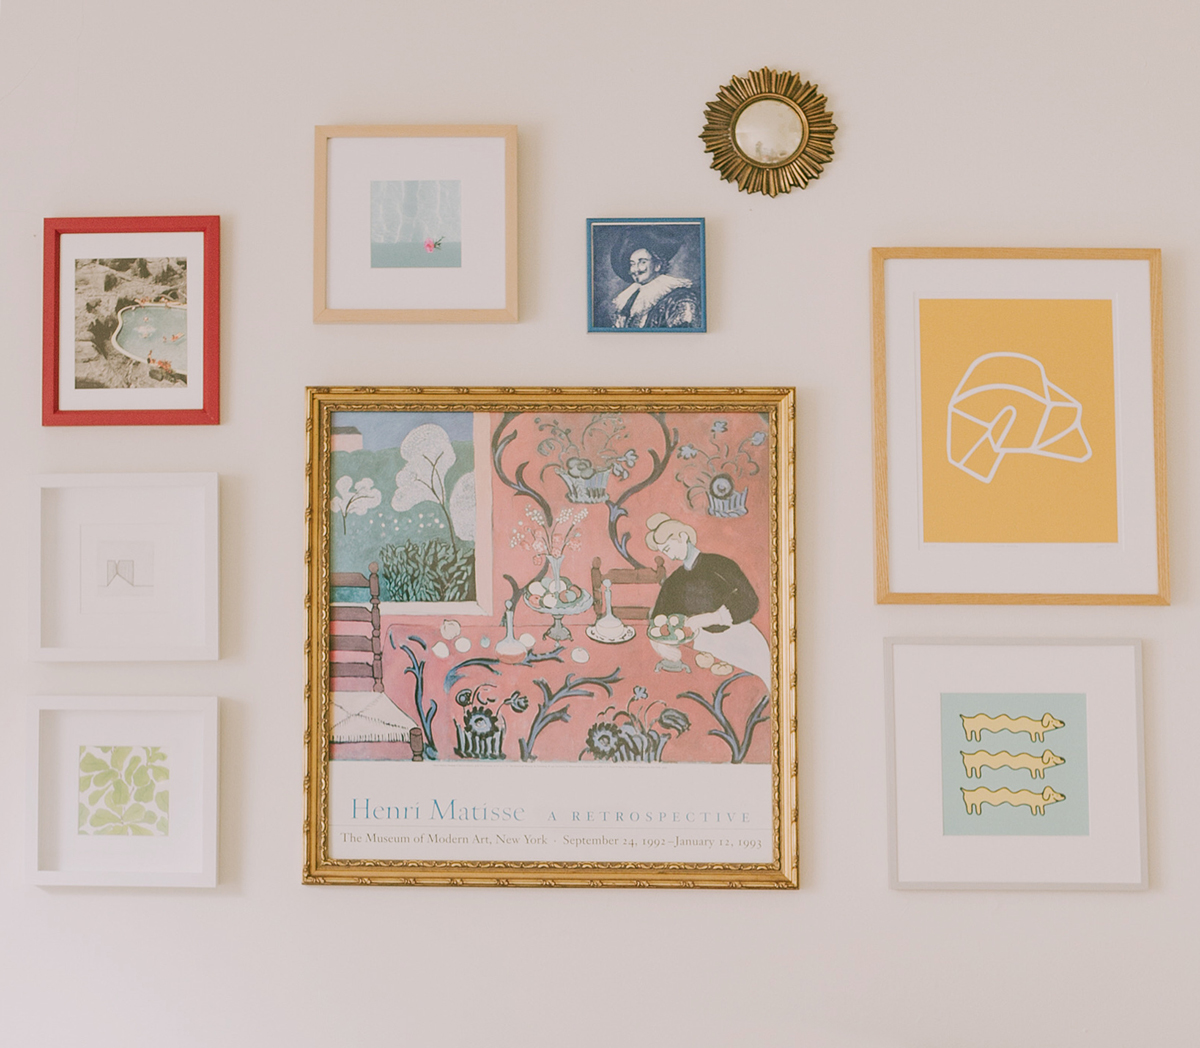 Gallery wall with framed art and photos